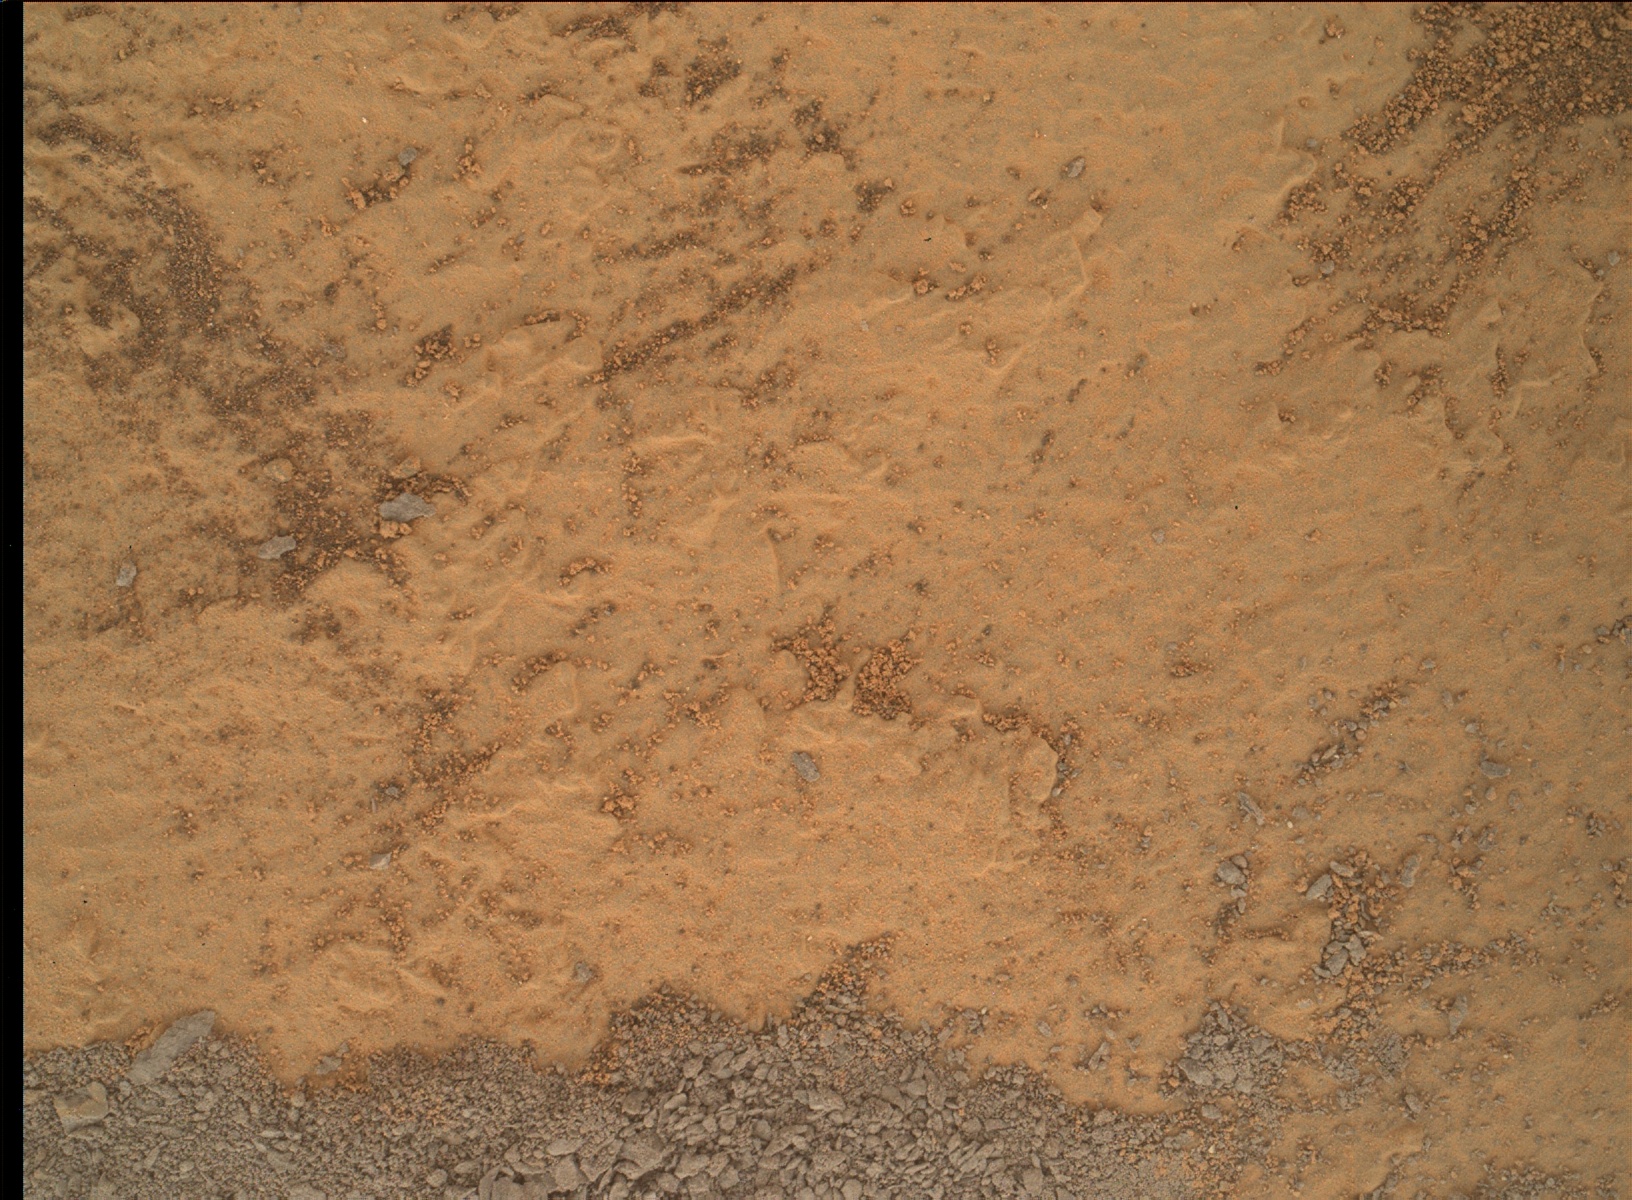 Nasa's Mars rover Curiosity acquired this image using its Mars Hand Lens Imager (MAHLI) on Sol 882